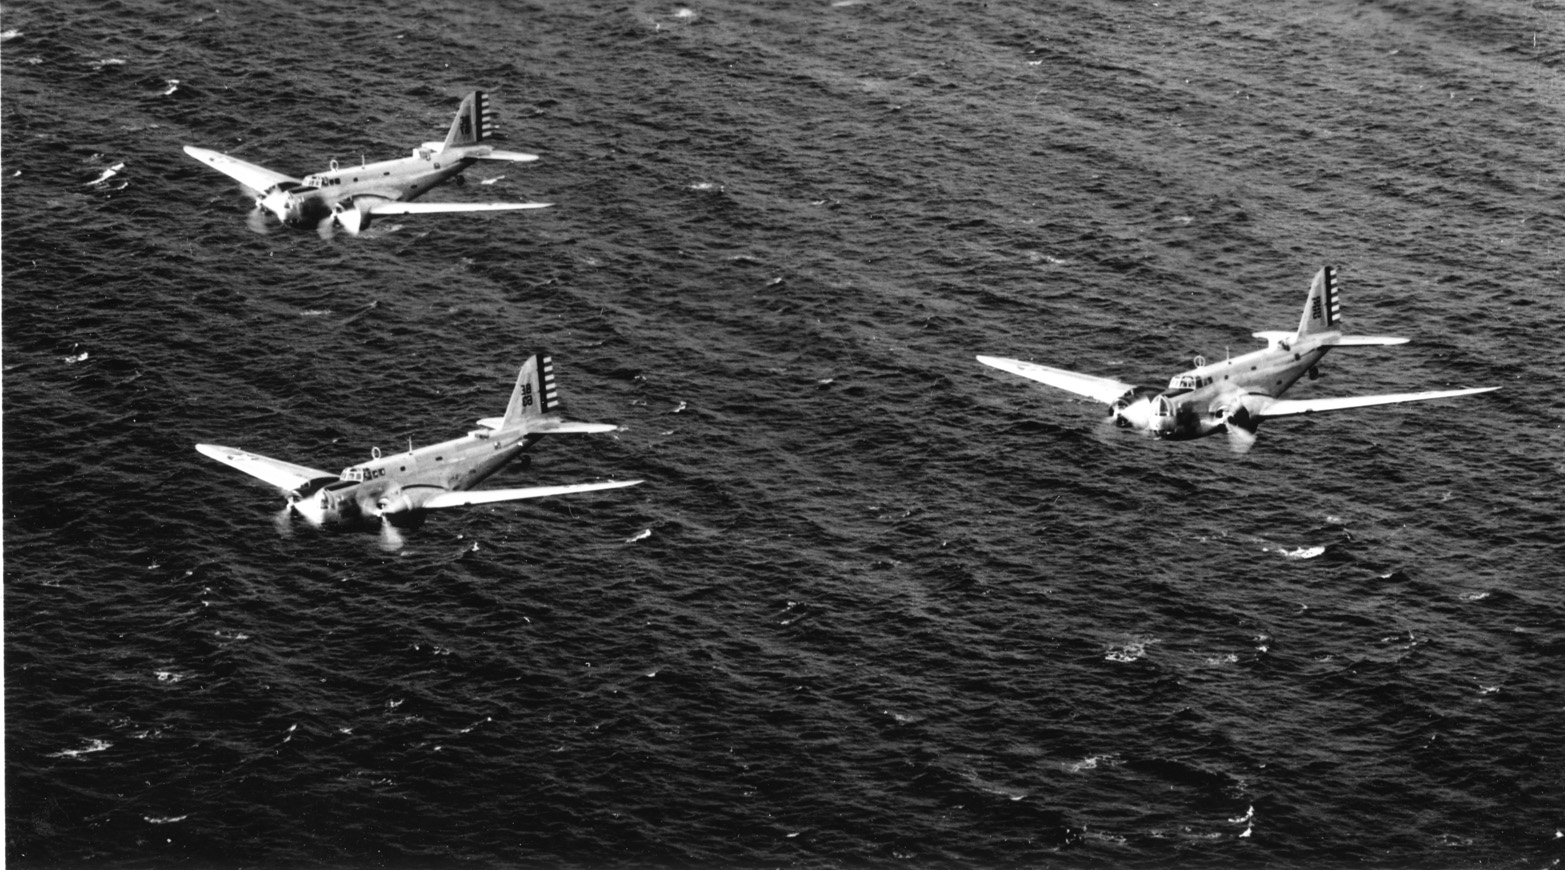 A flight of B-18 bombers wings its way over open water. The 27th Bombardment Group flew B-18s while it was stationed in Australia.